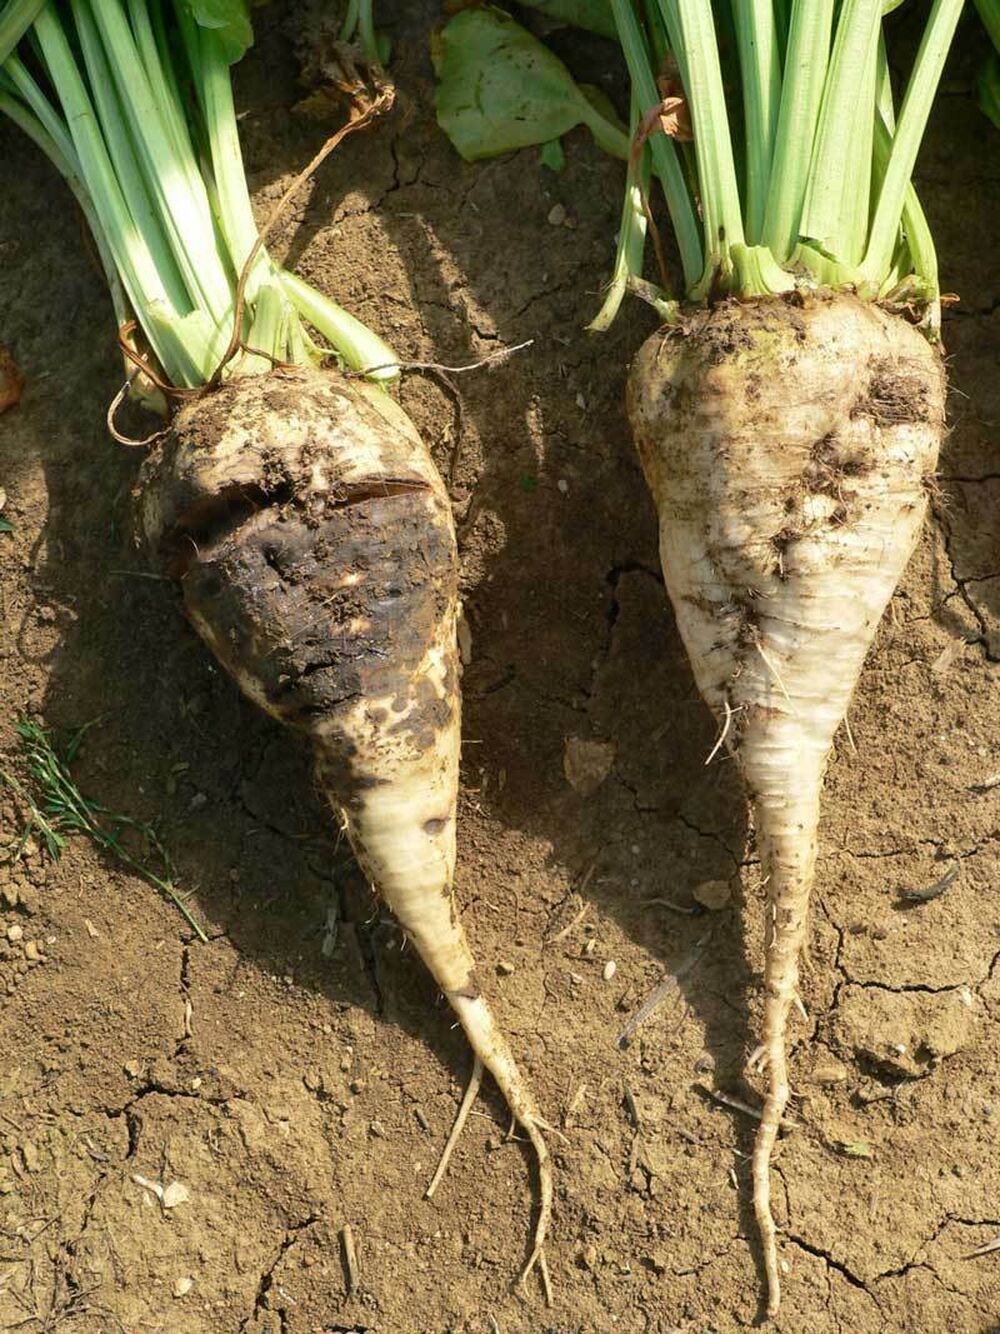 SESVanderHave - sugar beet pests and diseases - rhizoctonia root rot, comparison brown rotting of the sugar beet tap root